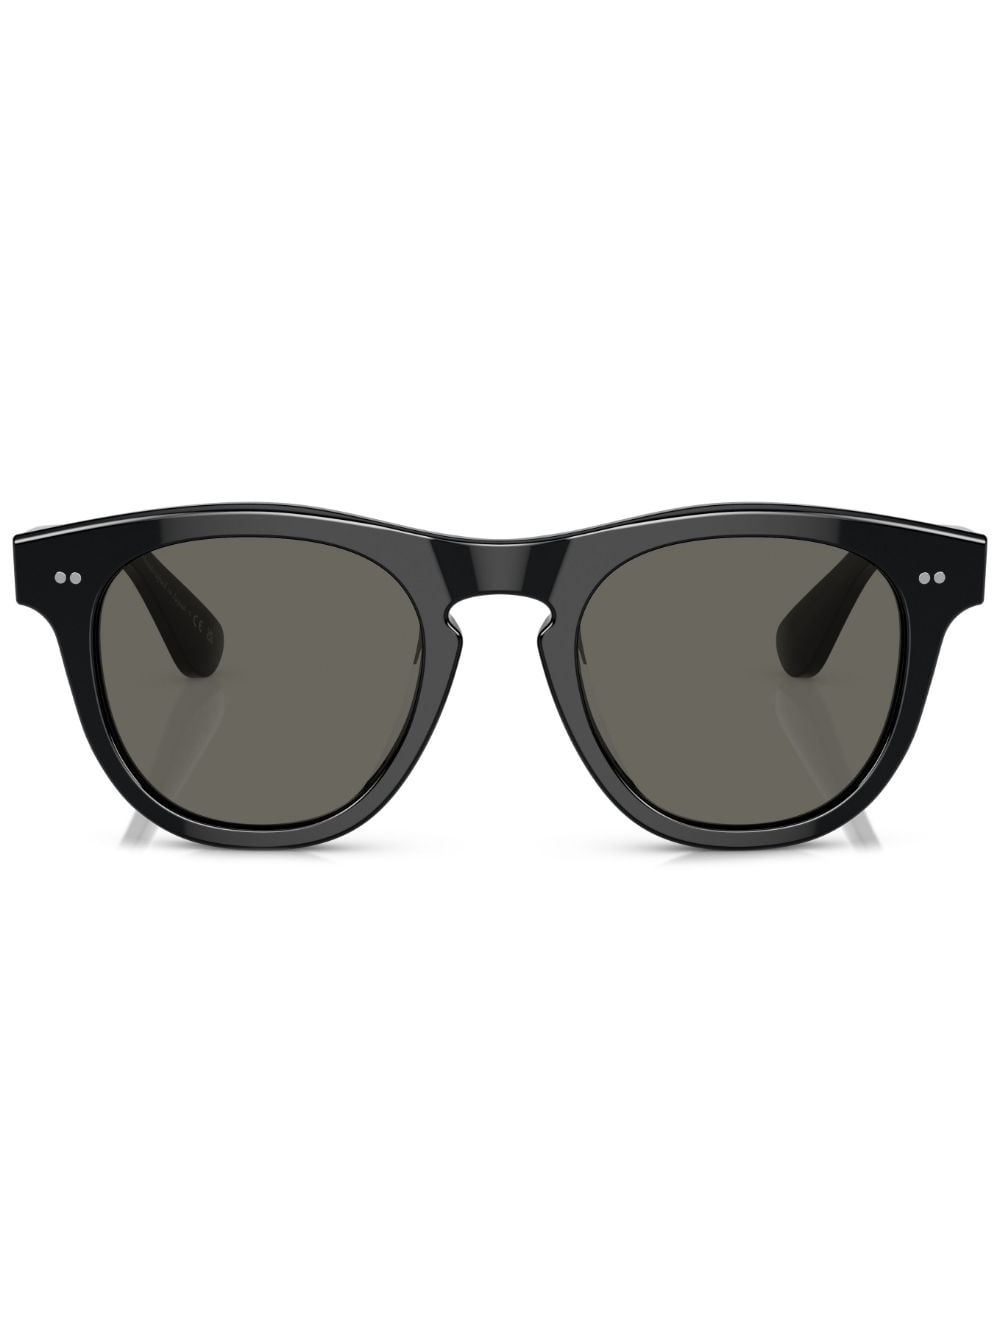 Oliver Peoples Rorke Square-shape Sunglasses In Black_carbon_grey